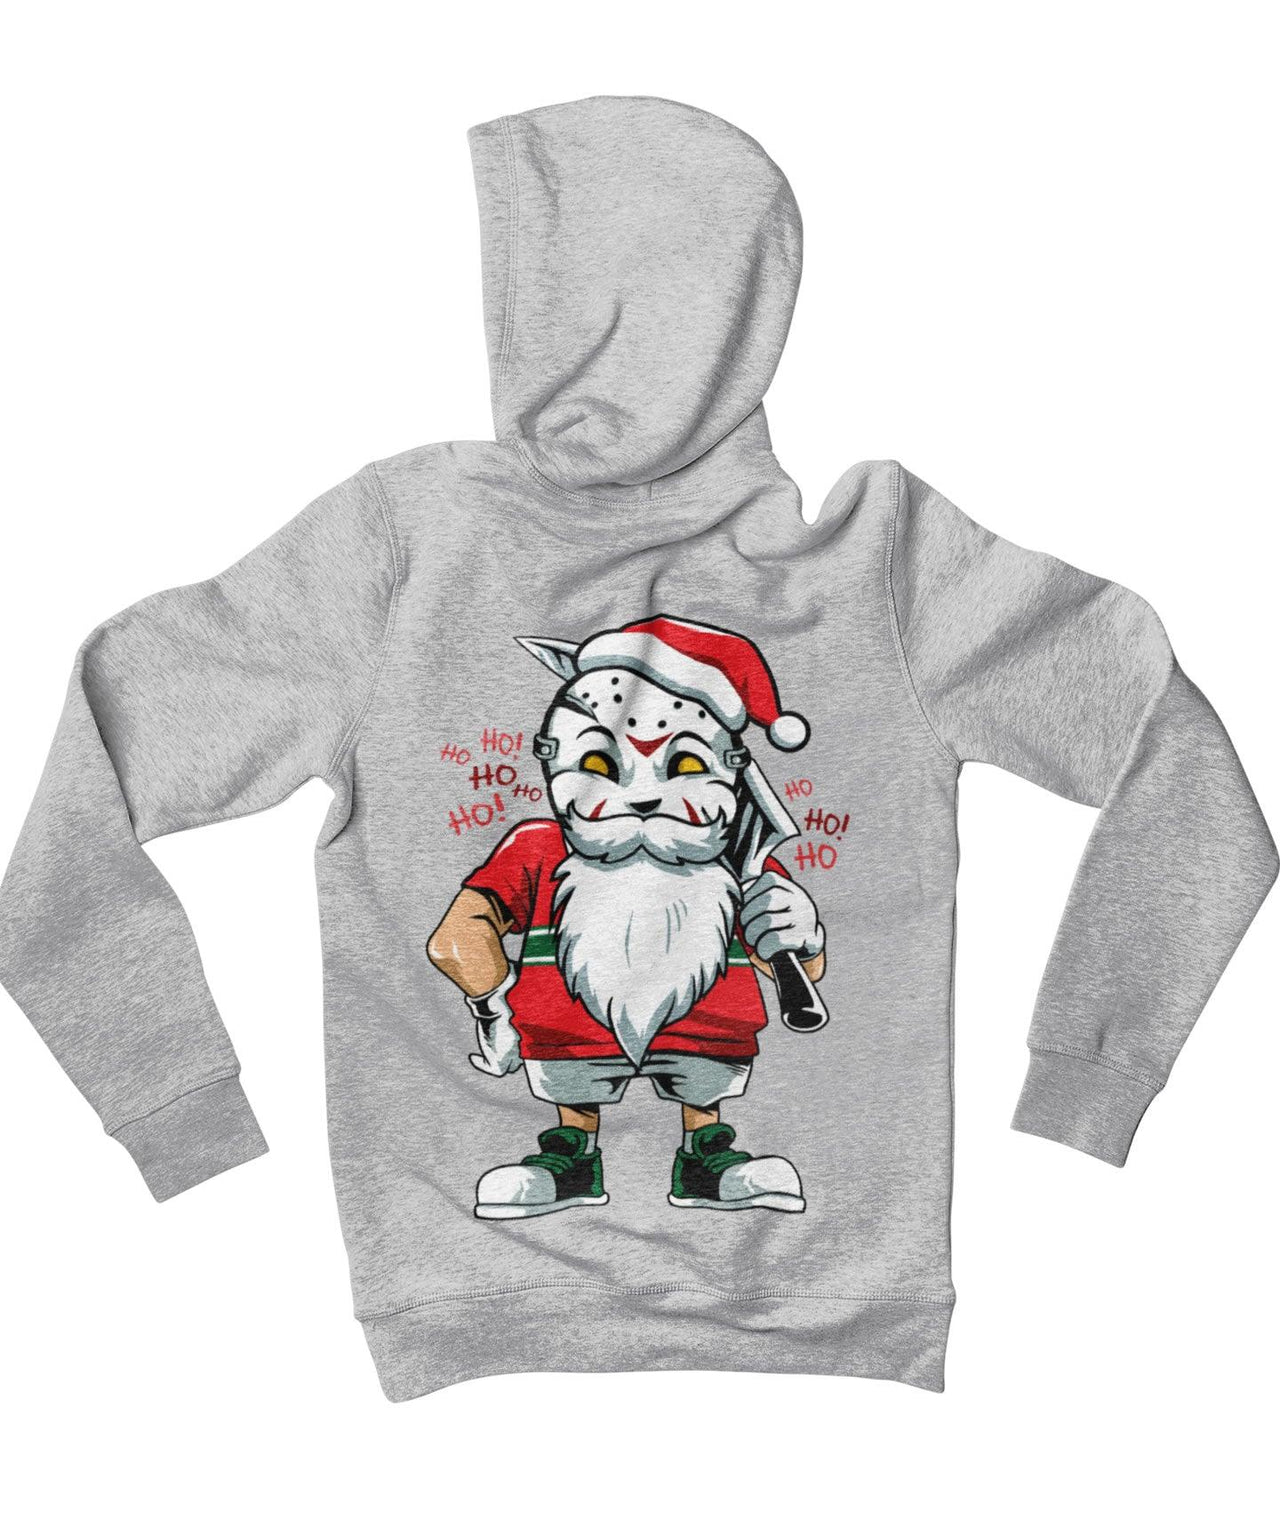 Another Evil Santa Back Printed Christmas Unisex Hoodie 8Ball